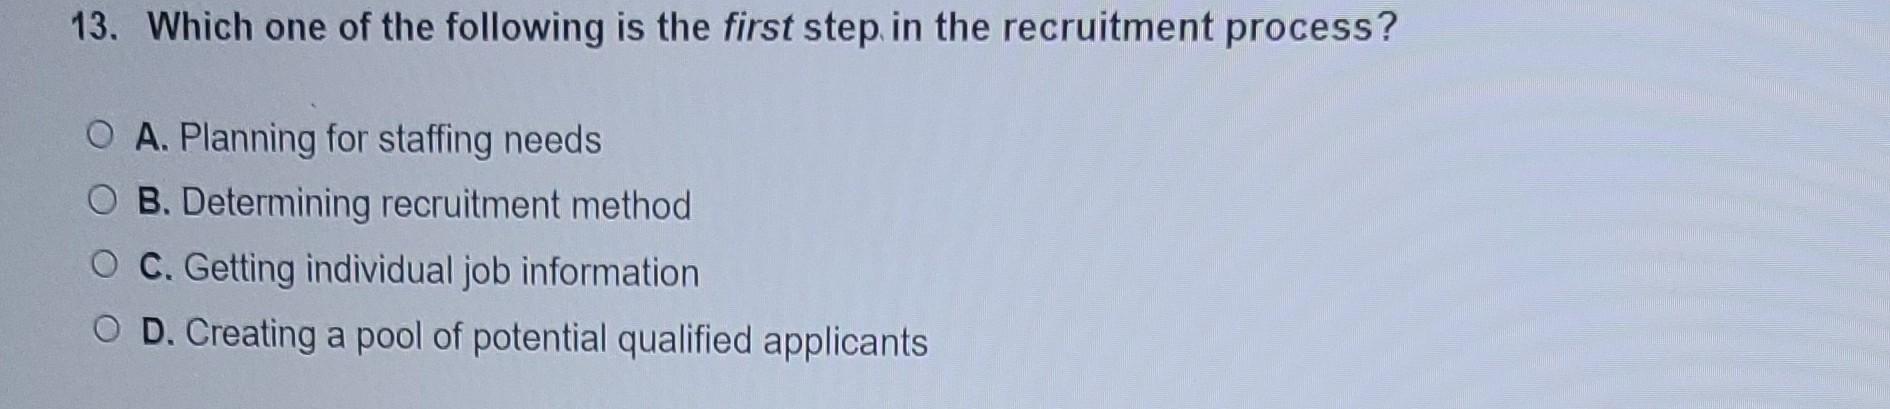 13. Which one of the following is the first step in the recruitment process? O A. Planning for staffing needs